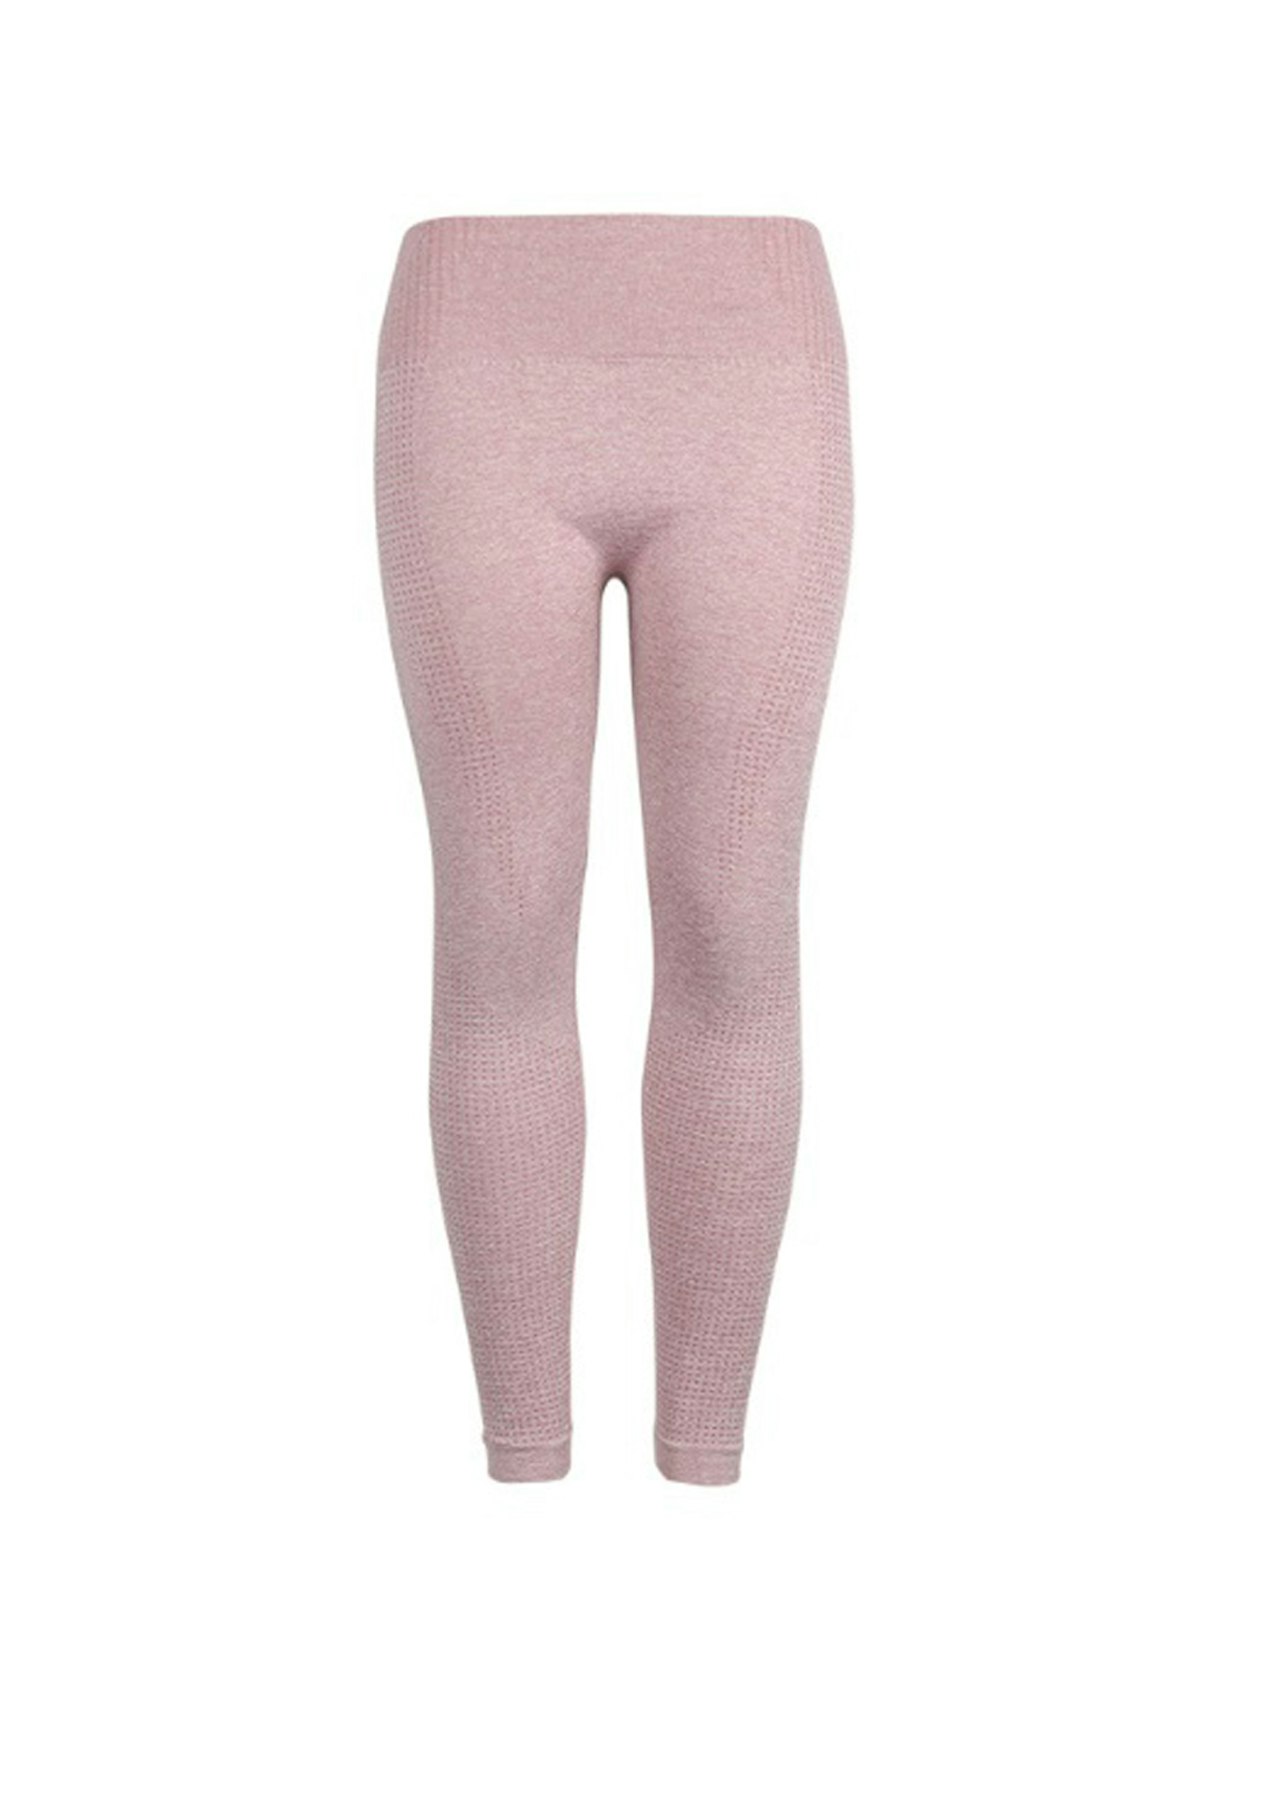 Fur Lined Leggings For Women Uk  International Society of Precision  Agriculture